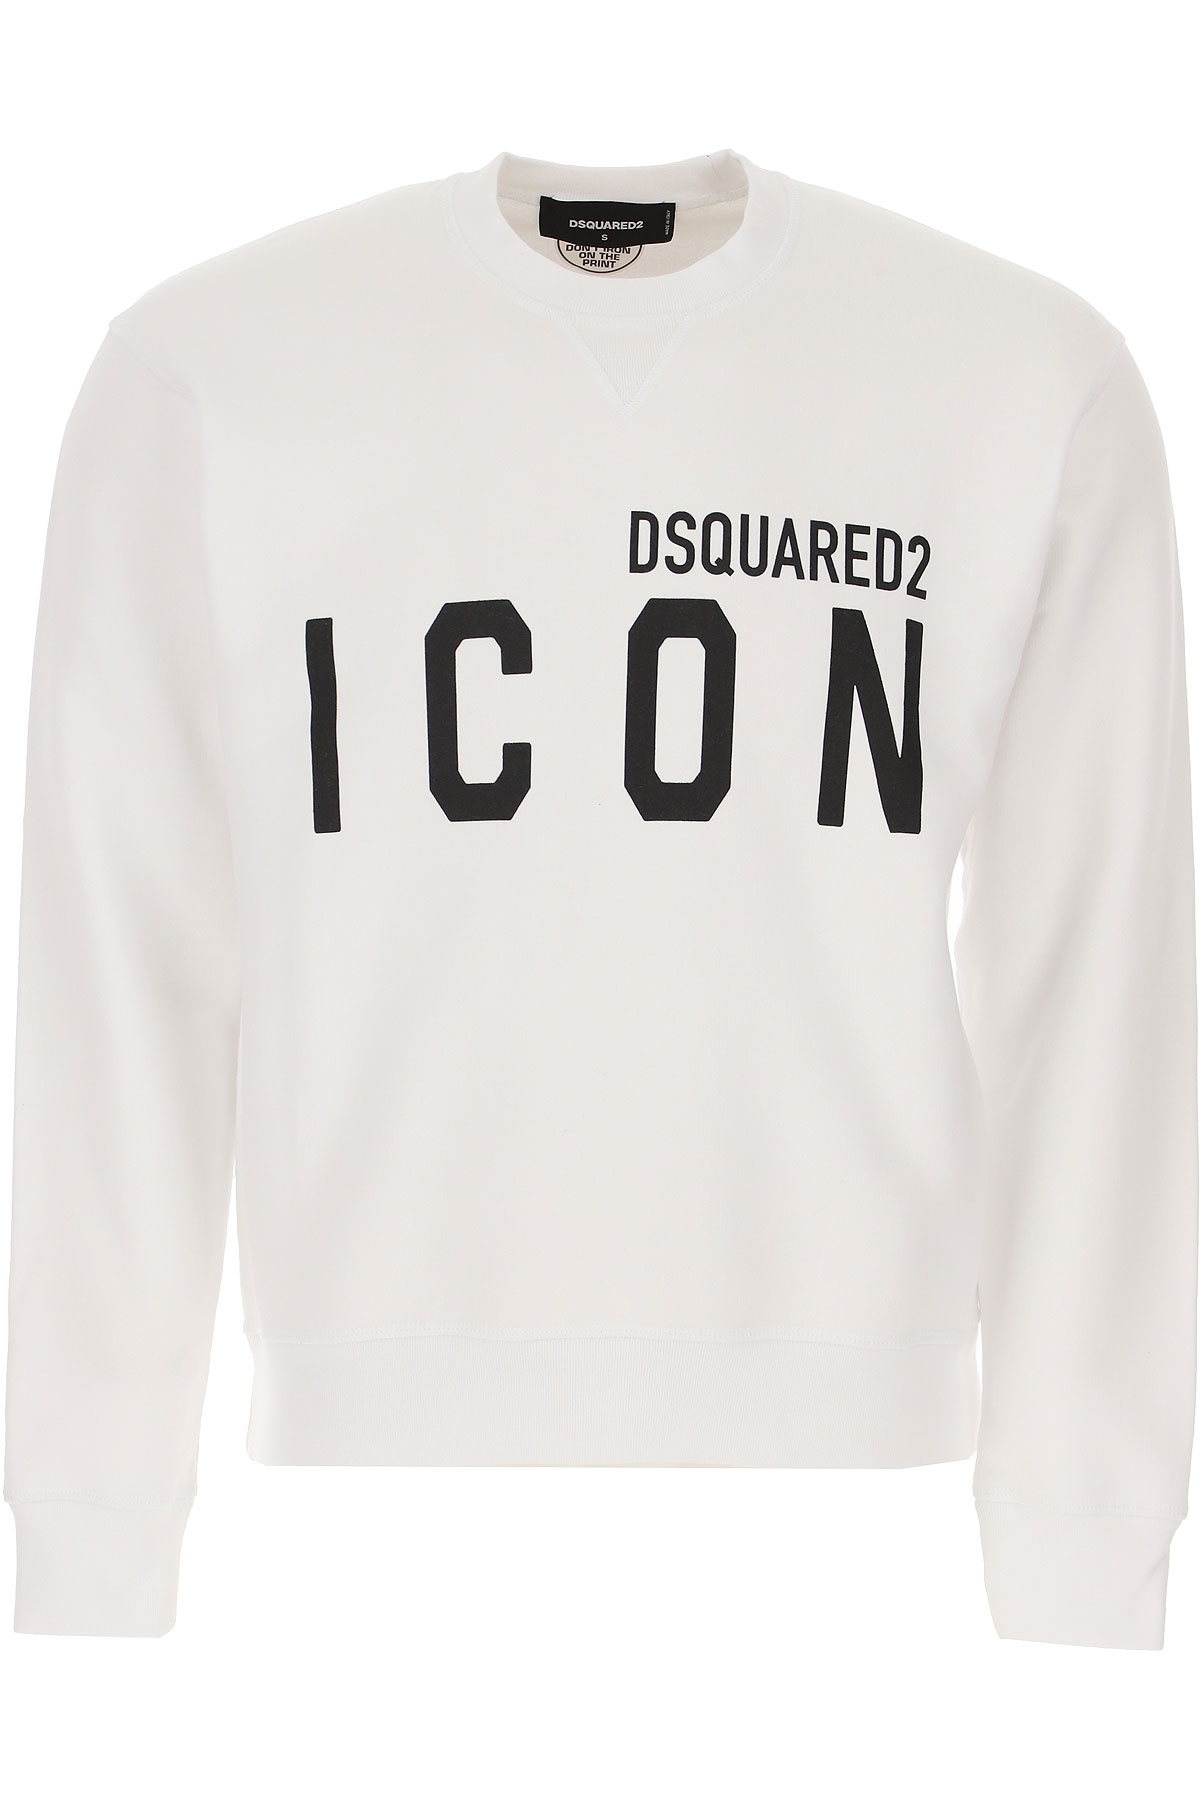 Mens Clothing Dsquared2, Style code: gu0004-s25042-100